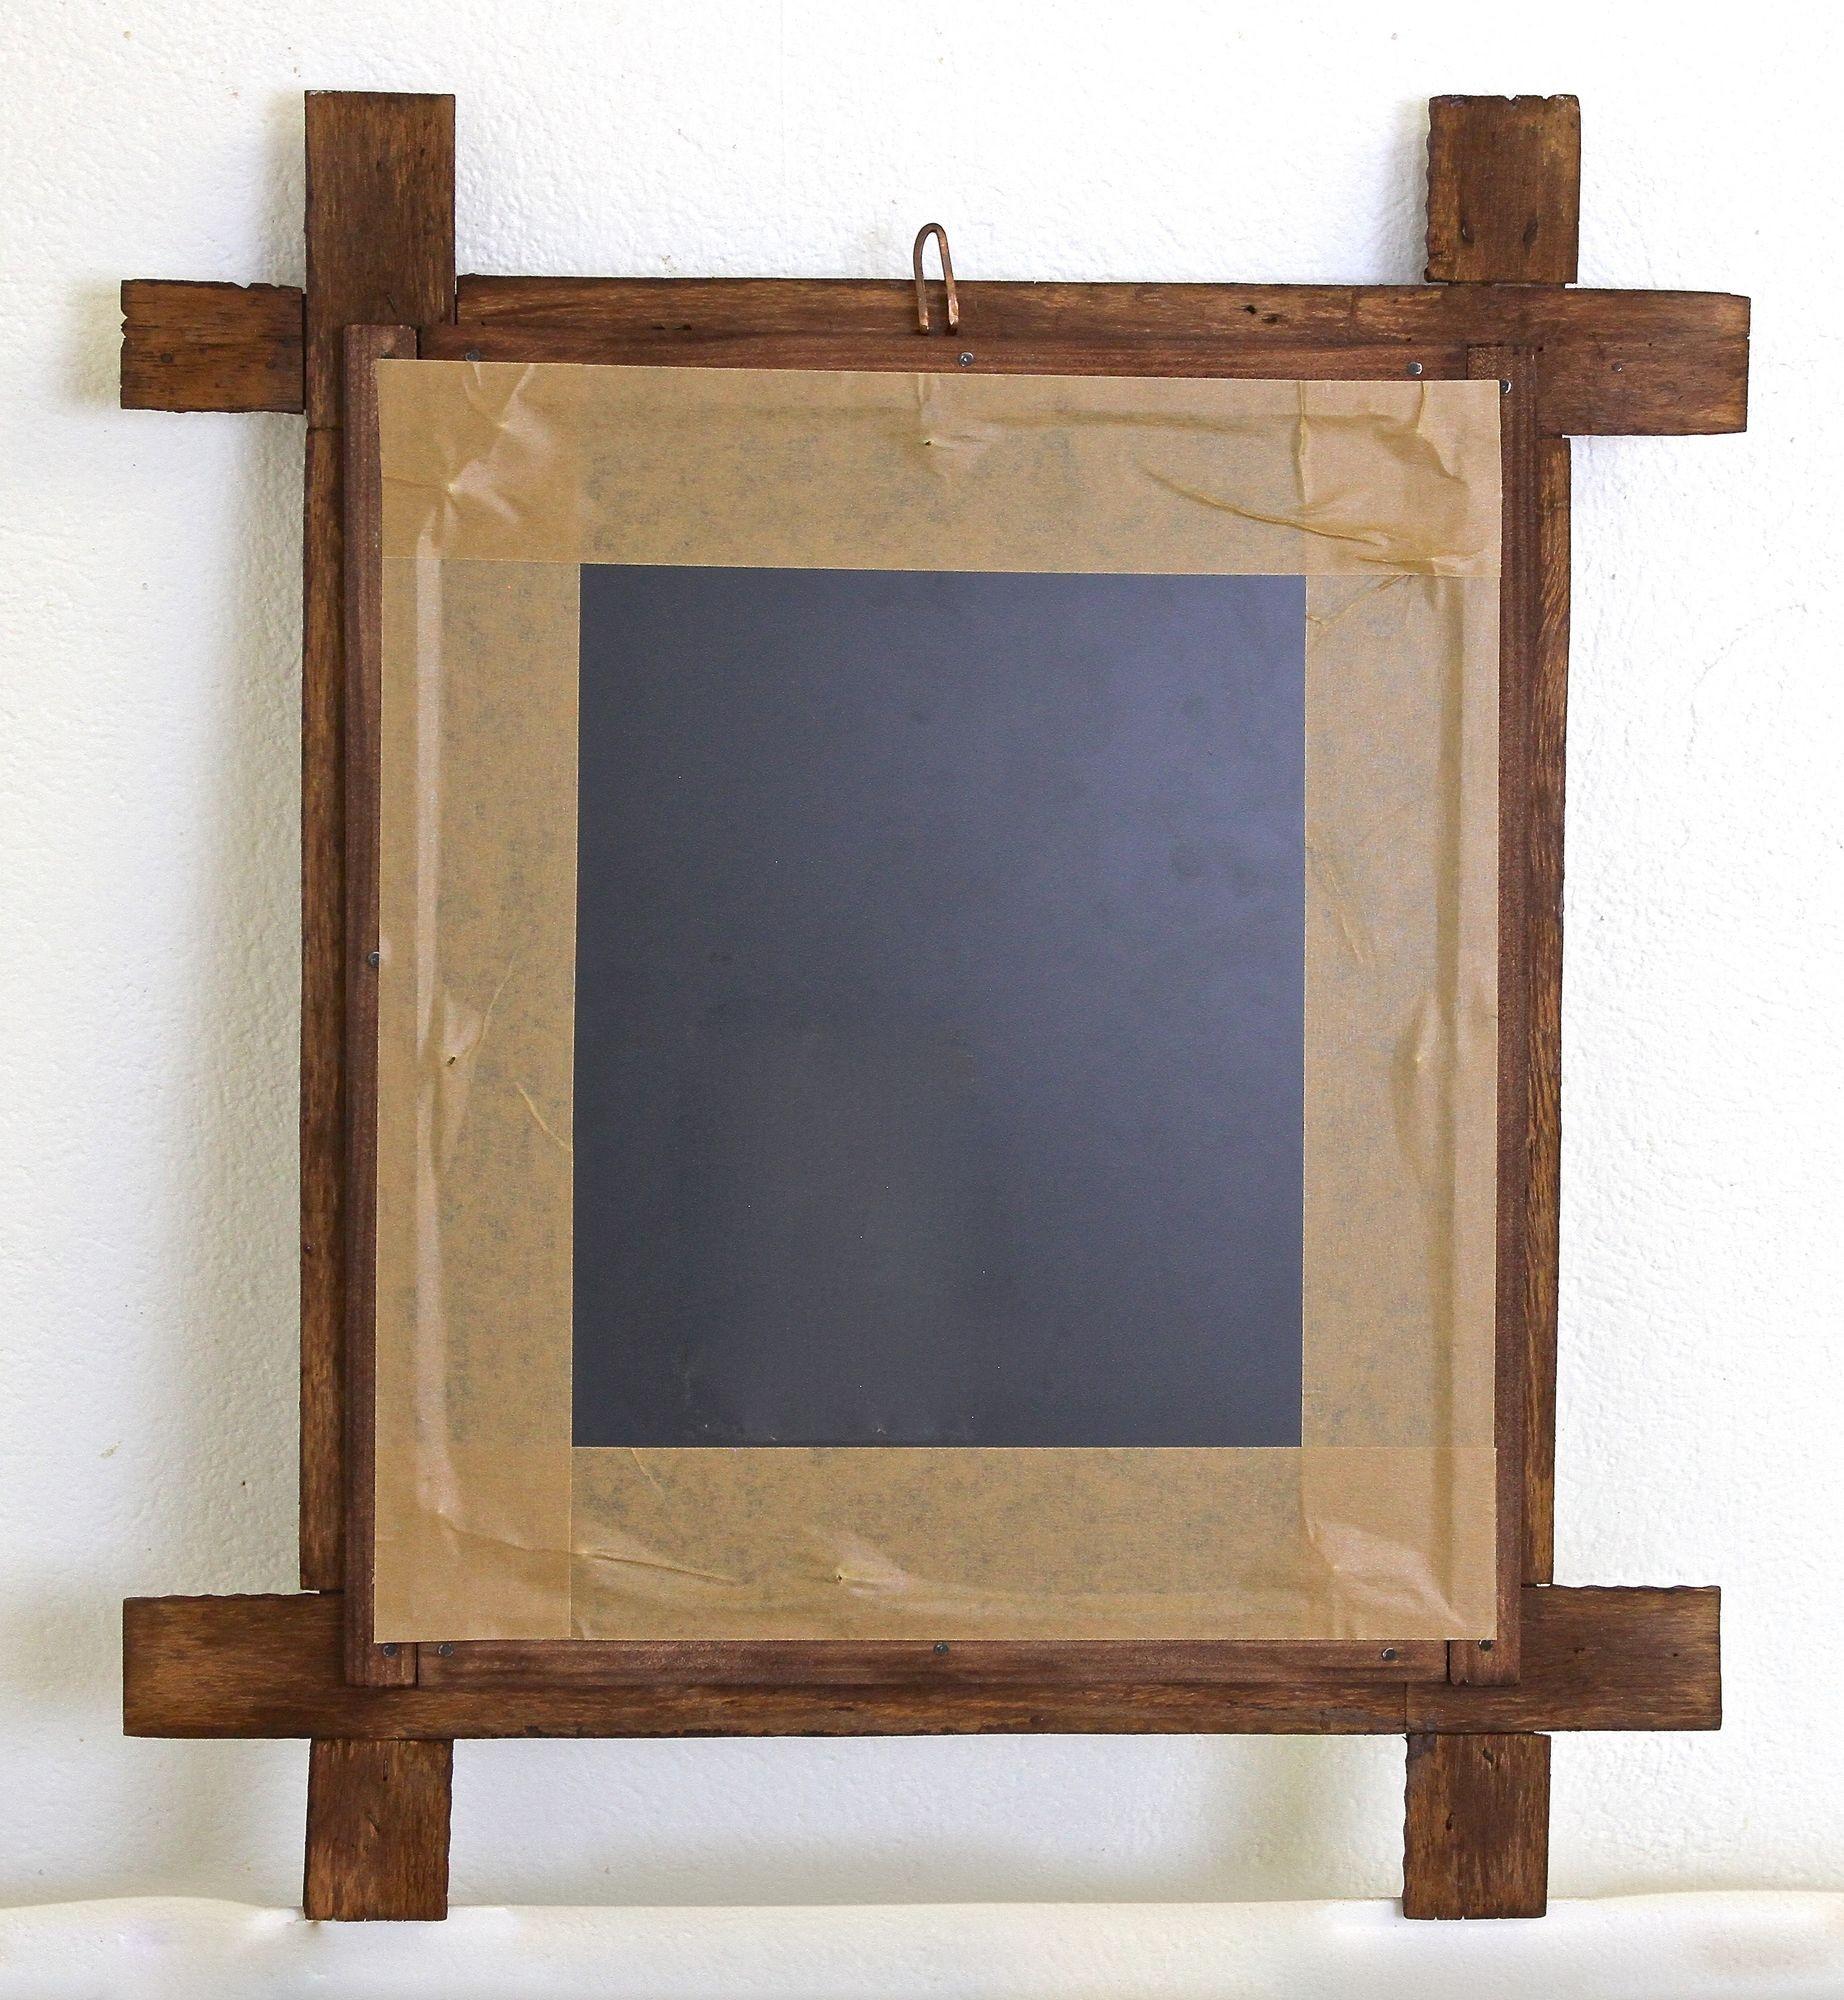 Rustic Tramp Art Wall Mirror with Chip Carvings, Austria circa 1880 For Sale 8